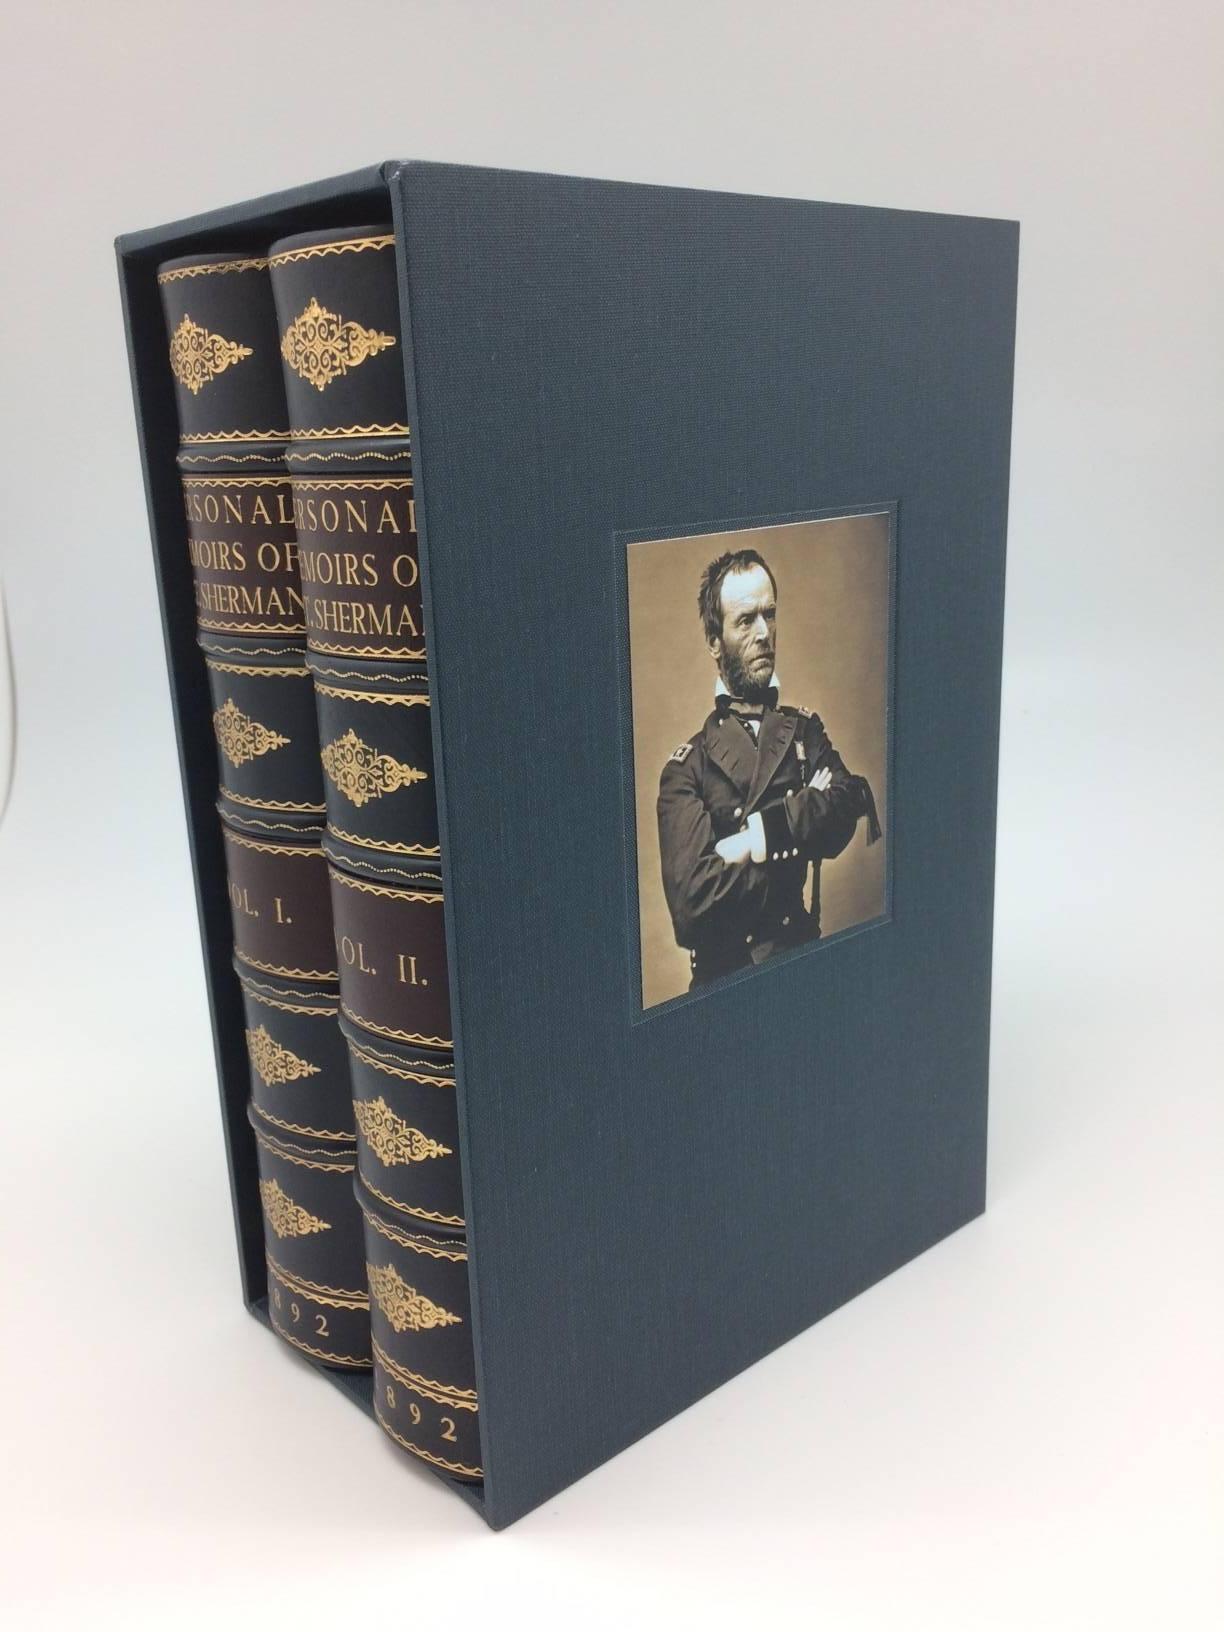 Early printing, of this invaluable autobiography, incorporating corrections and revisions by Sherman and including a concluding chapter on Sherman’s final illness and death, and a personal tribute by Congressman James G. Blaine. With 15 folding maps